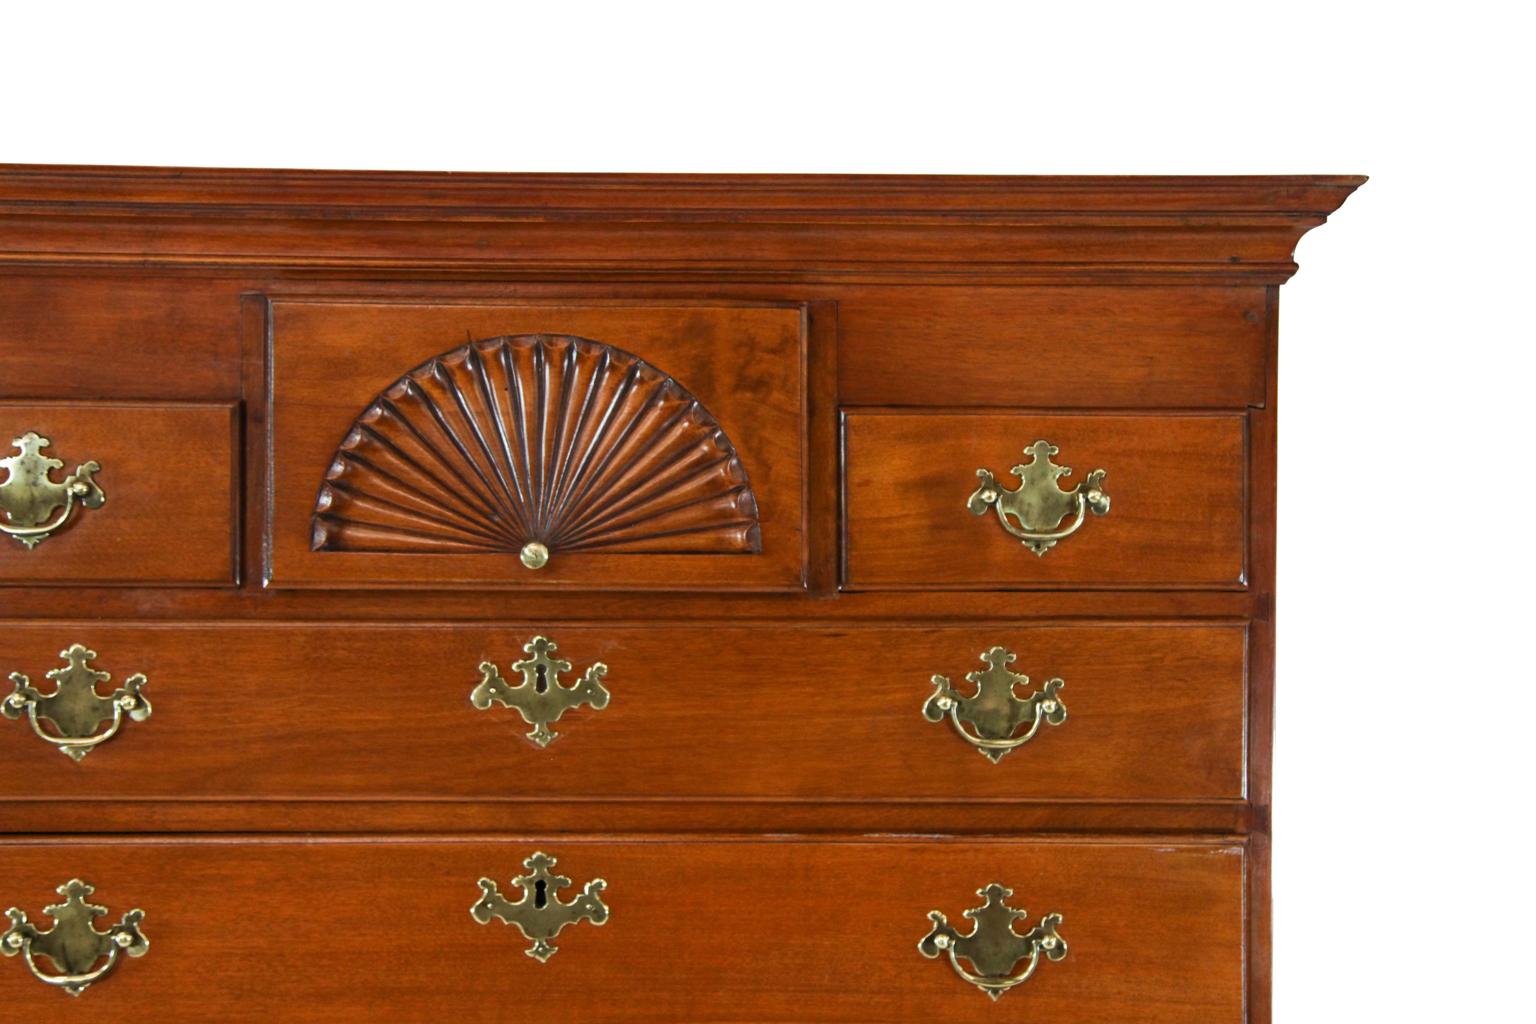 American Queen Anne flat top maple highboy, with cove cornice, upper section with carved fan drawer flanked by two drawers over four drawers retaining original brass pulls. The lower section with long drawer above fan carved drawer flanked by two